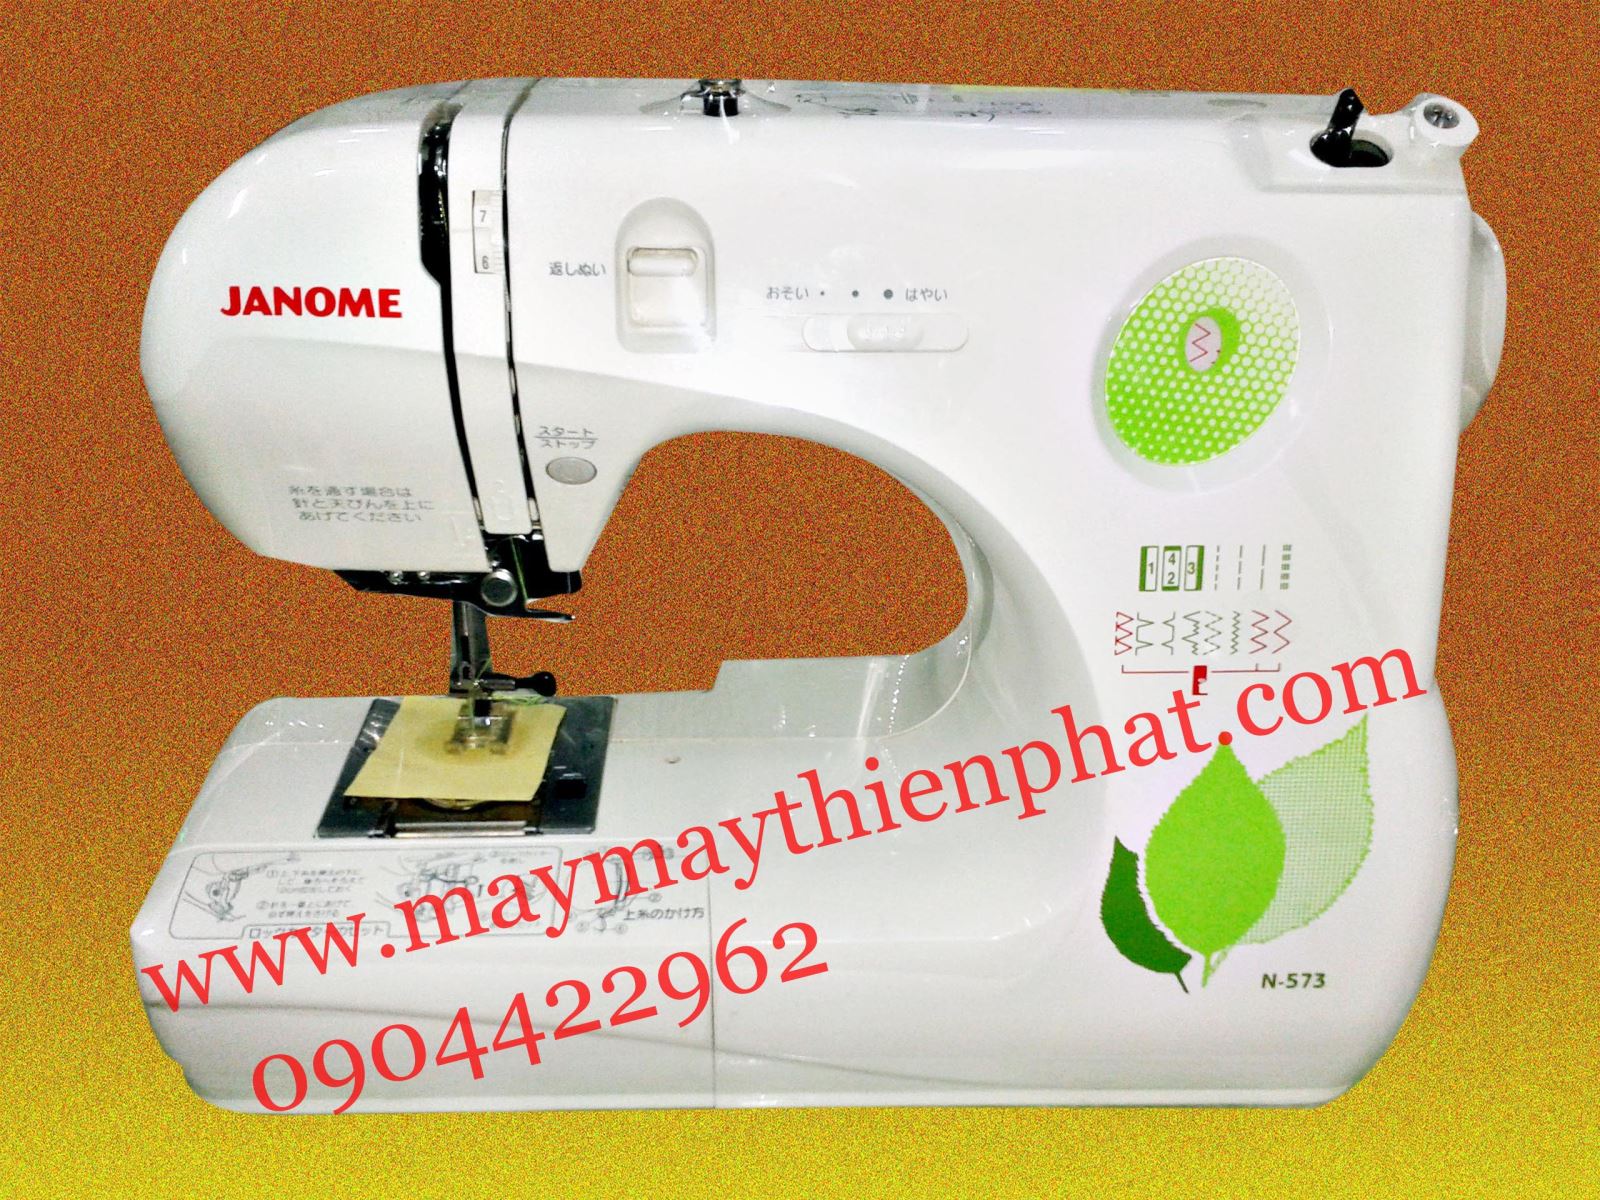 JANOME N-753